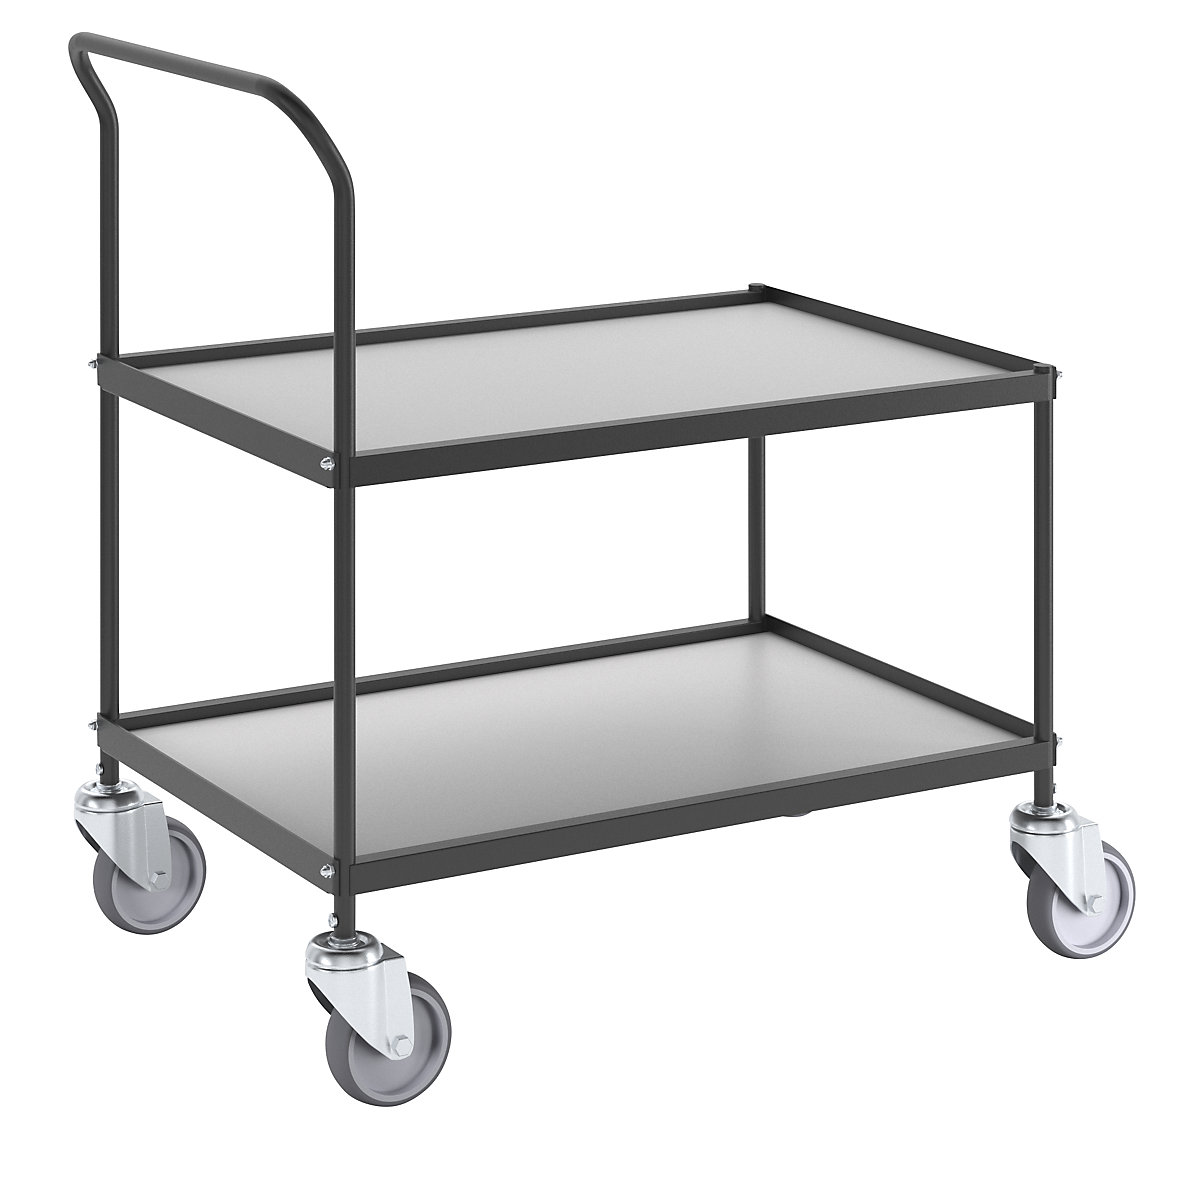 Serving and clearing trolley, 2 shelves, LxWxH 830 x 545 x 920 mm-8